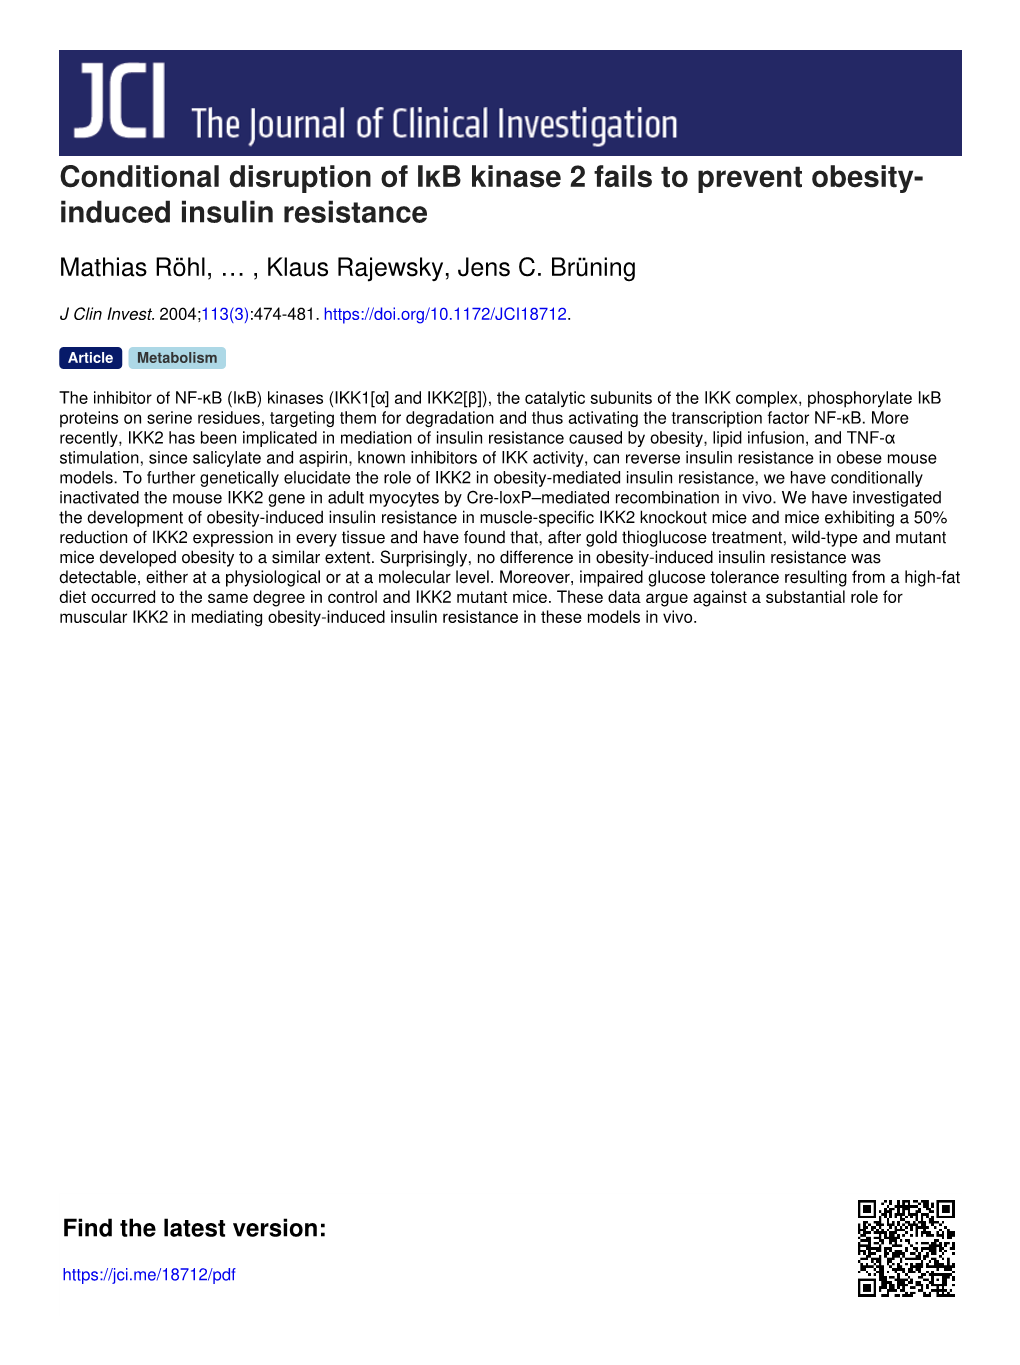 Conditional Disruption of Iκb Kinase 2 Fails to Prevent Obesity- Induced Insulin Resistance